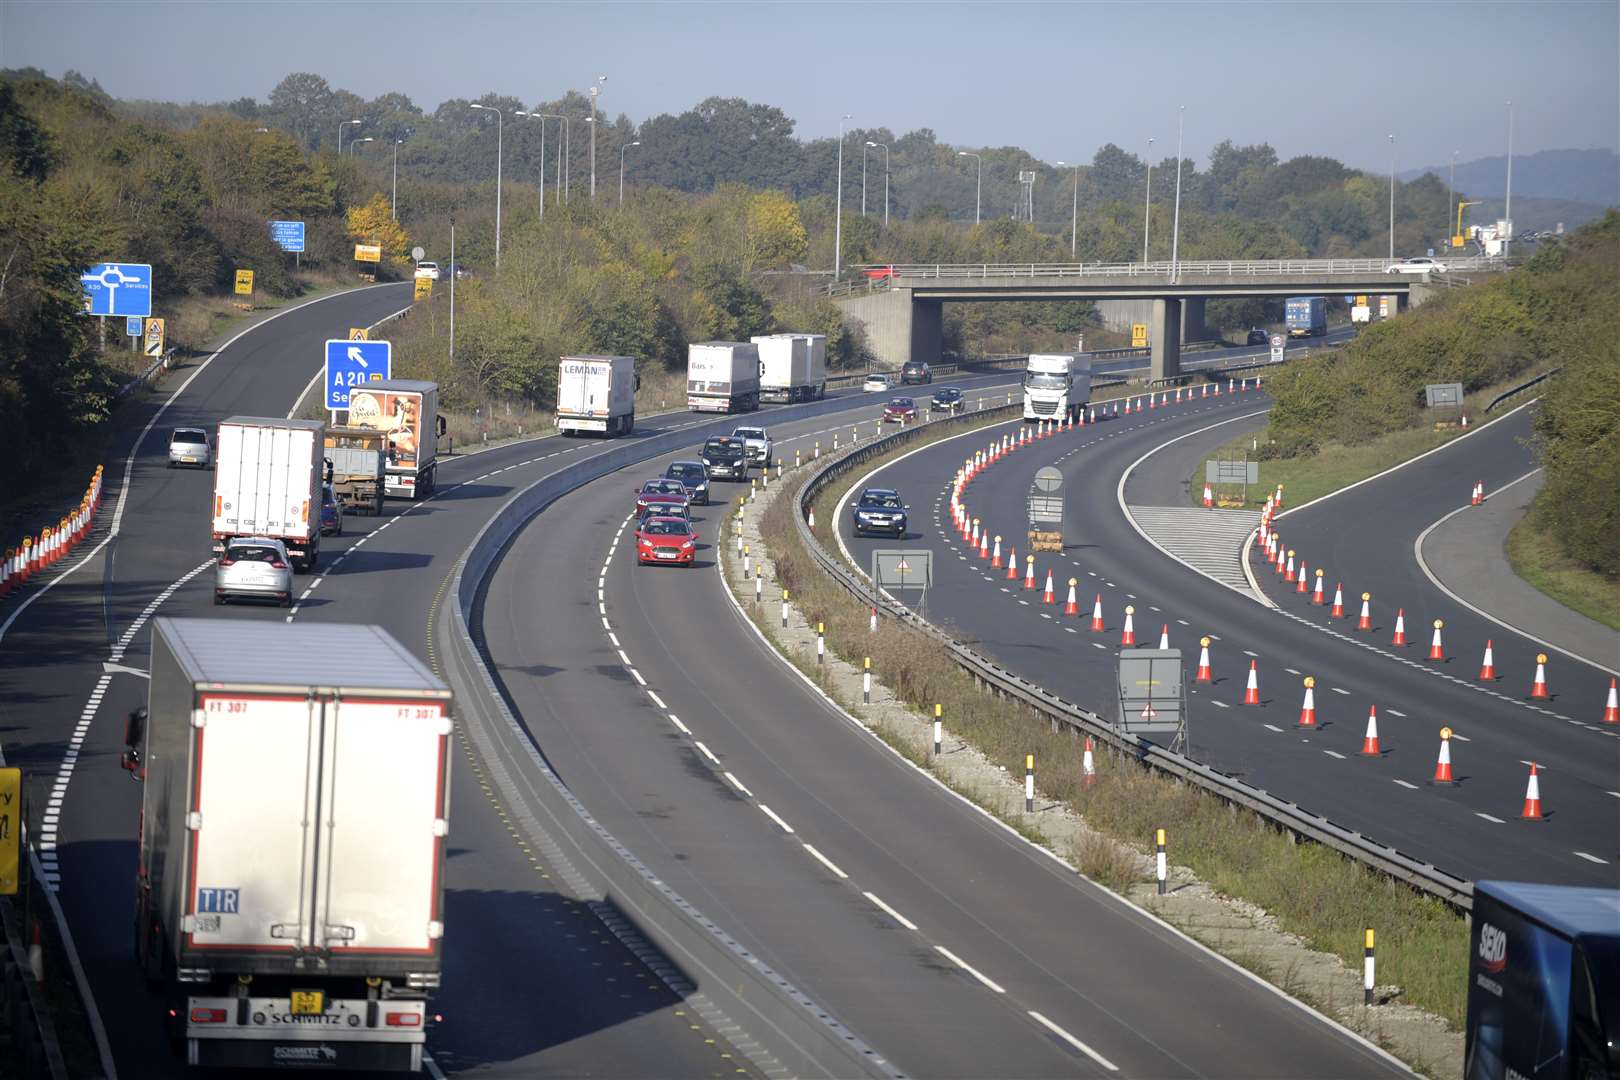 The M20 has rarely been a usual 70mph motorway in recent years